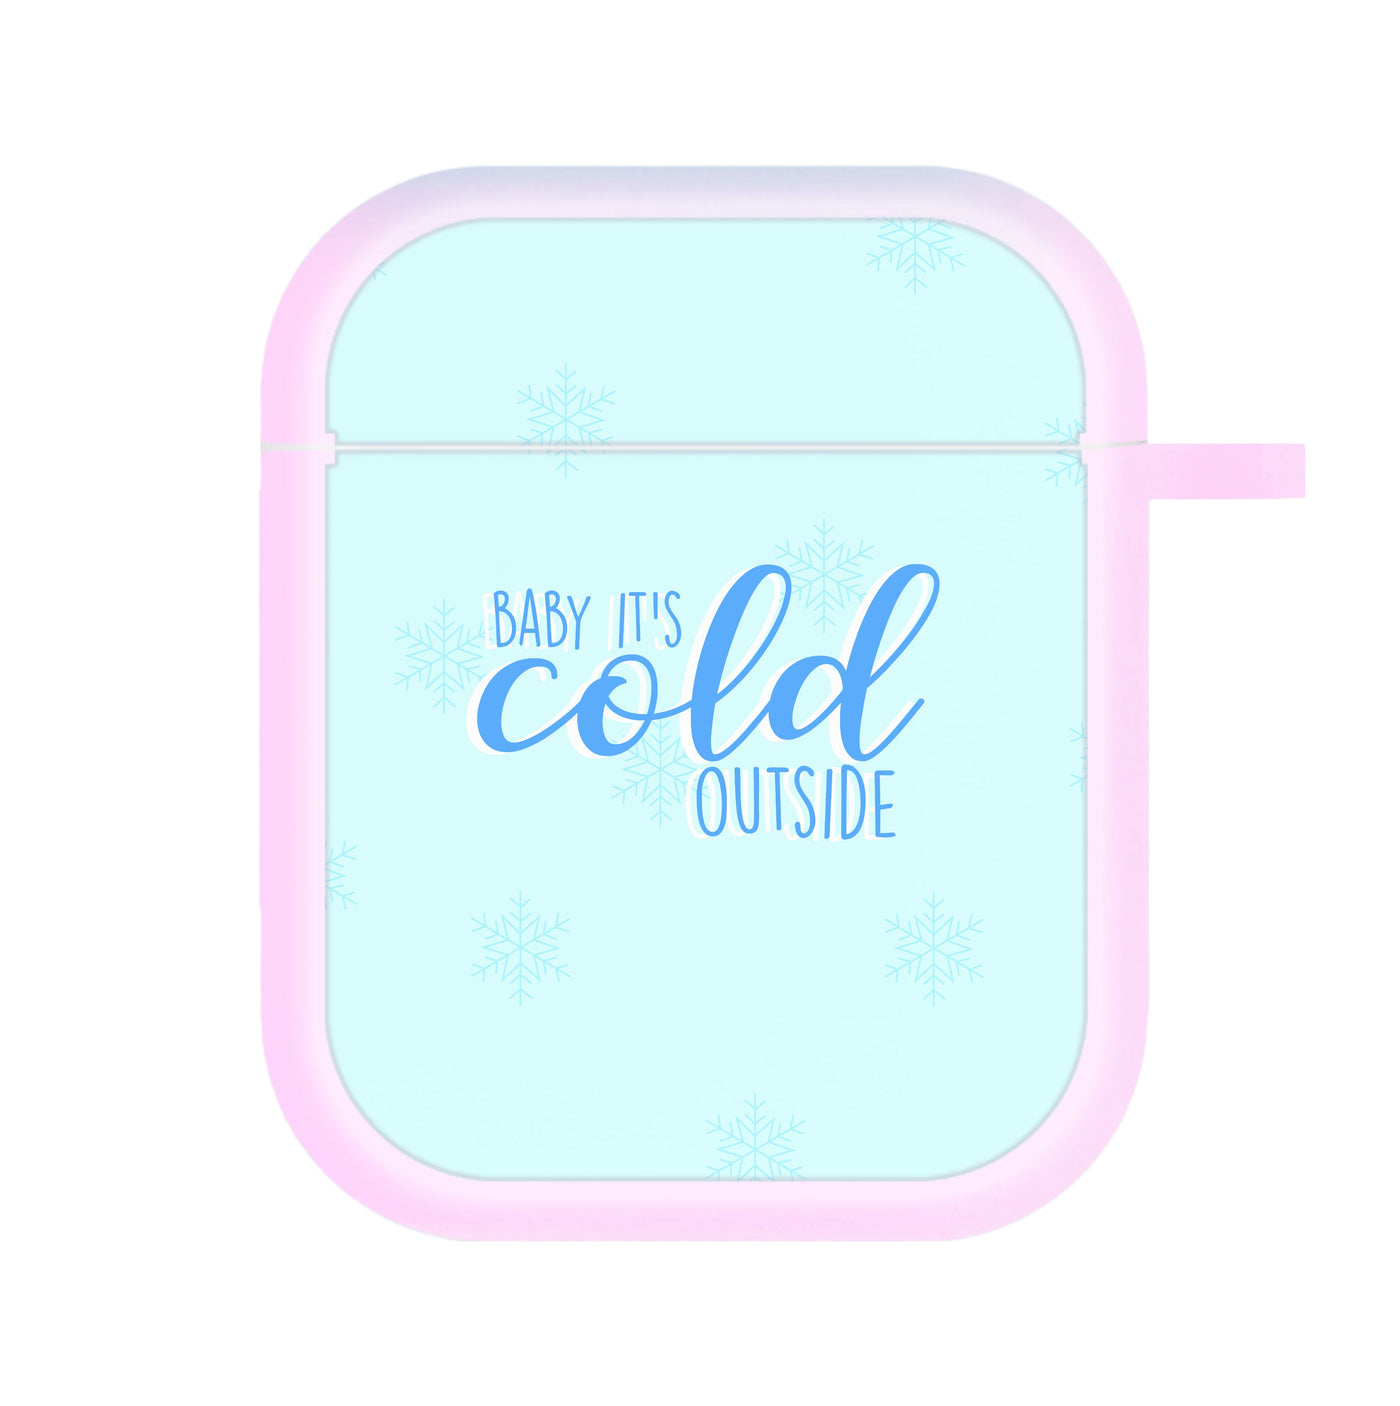 Baby It's Cold Outside - Christmas Songs AirPods Case